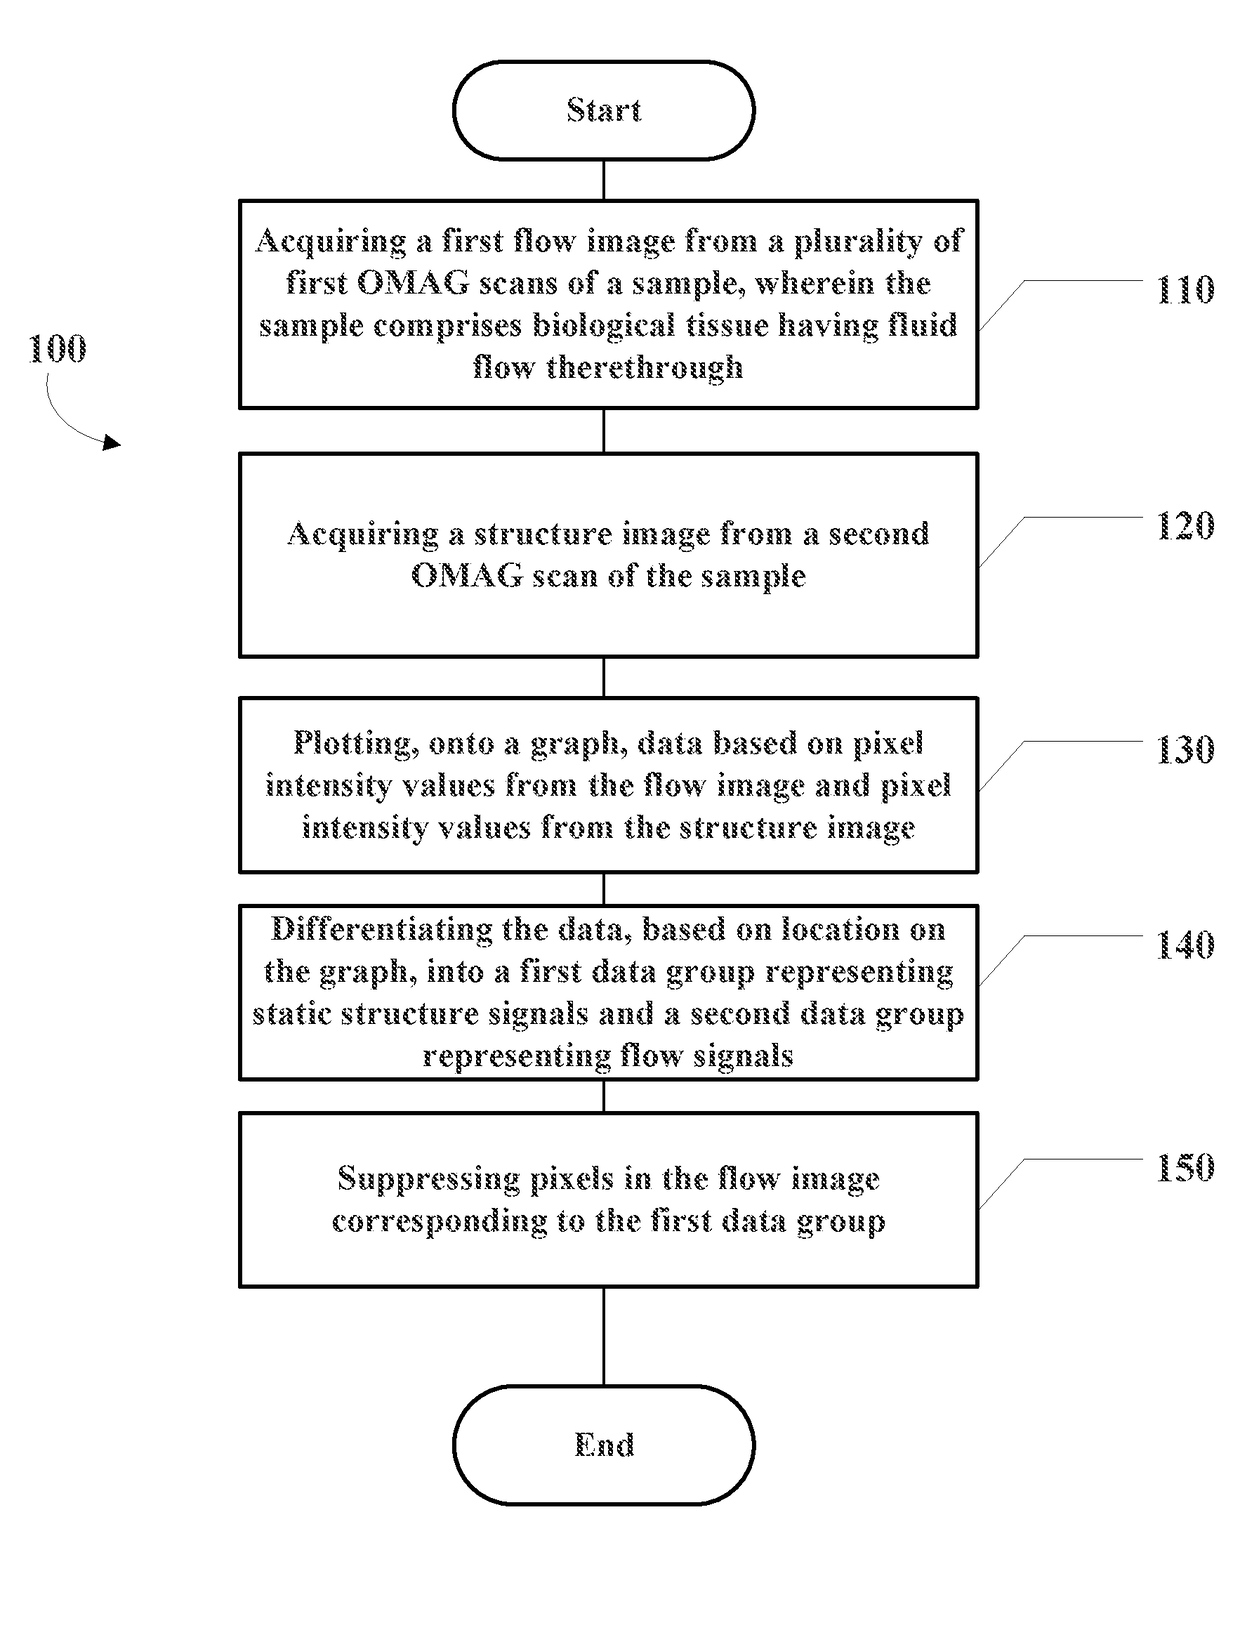 Methods and systems for enhancing microangiography image quality